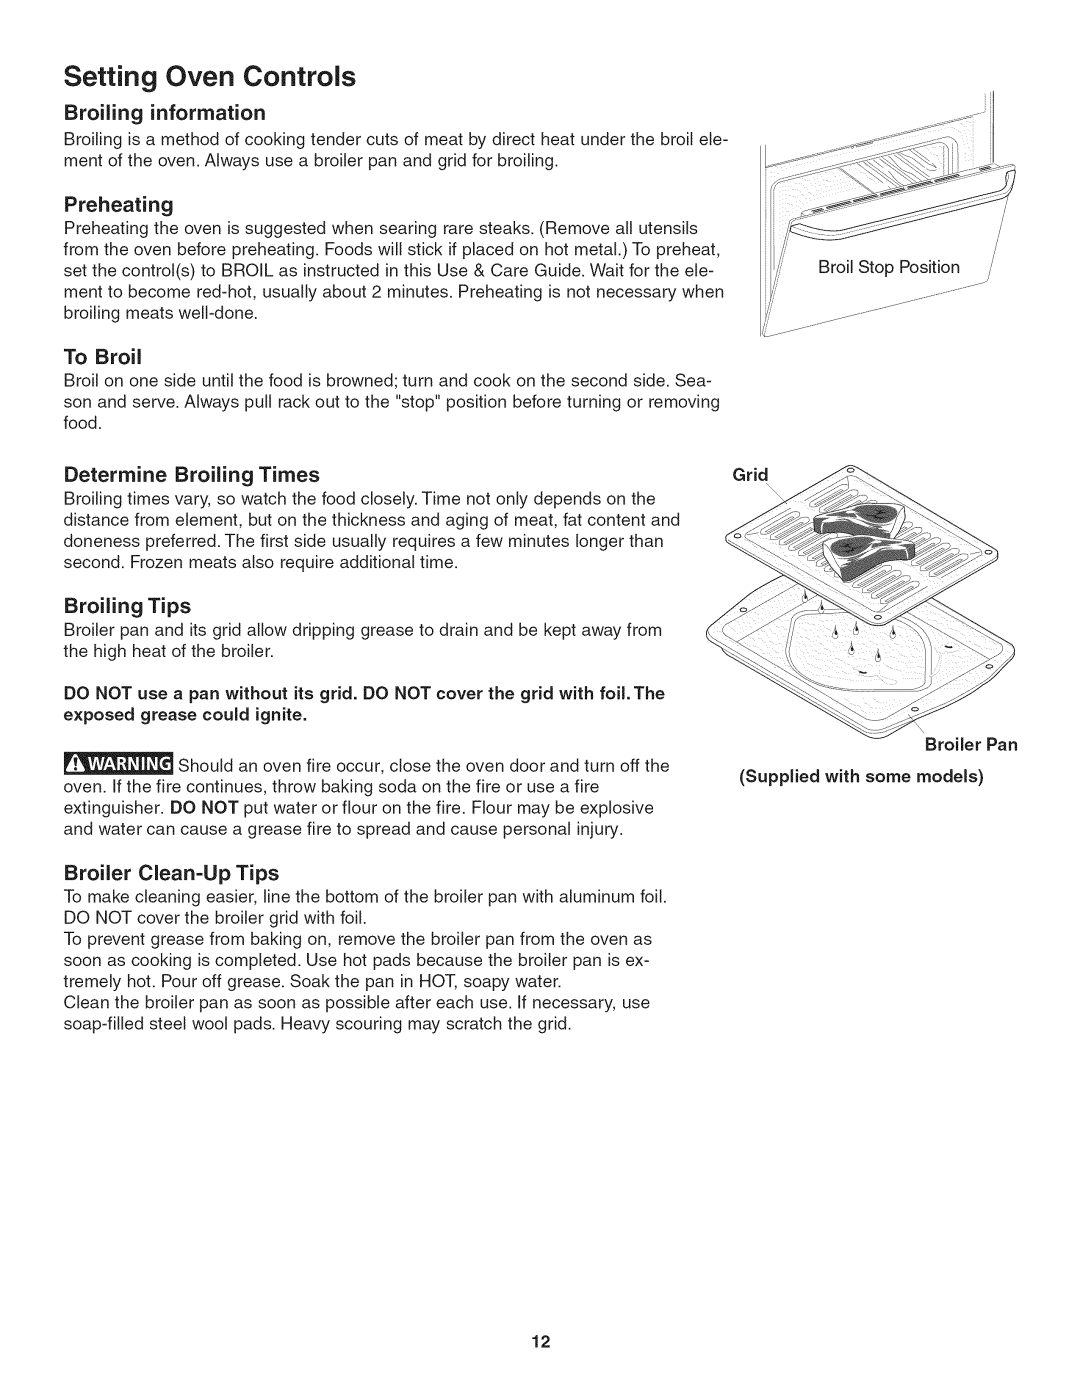 Kenmore 790. 4045 manual Setting Oven Controls, To Broil, Determine, Times, Broiling Tips, Broiler Clean-UpTips, Grid 